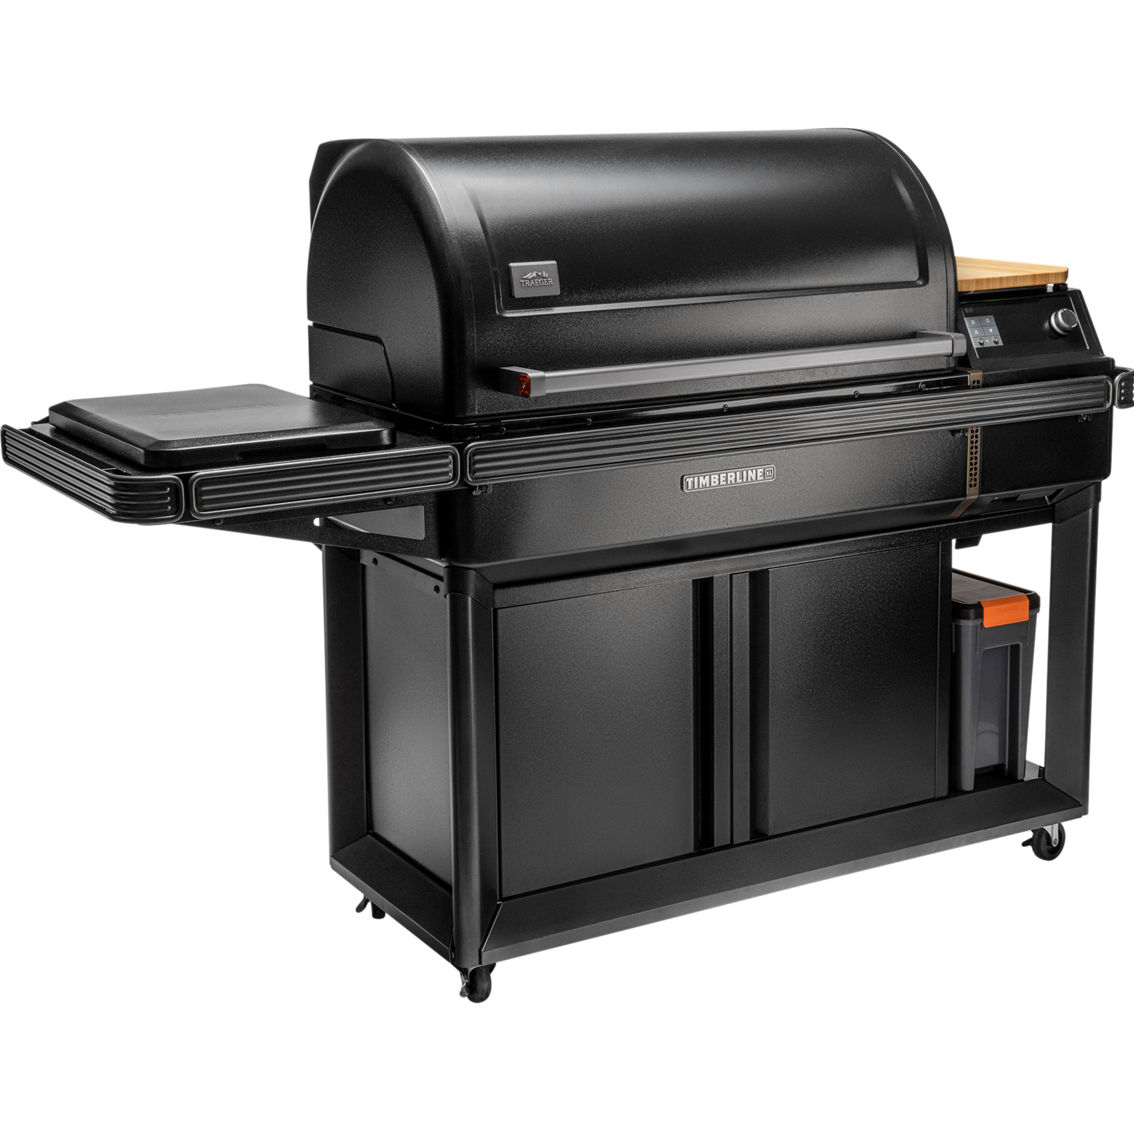 Traeger New Timberline Wood Pellet Grill XL - Image 2 of 6